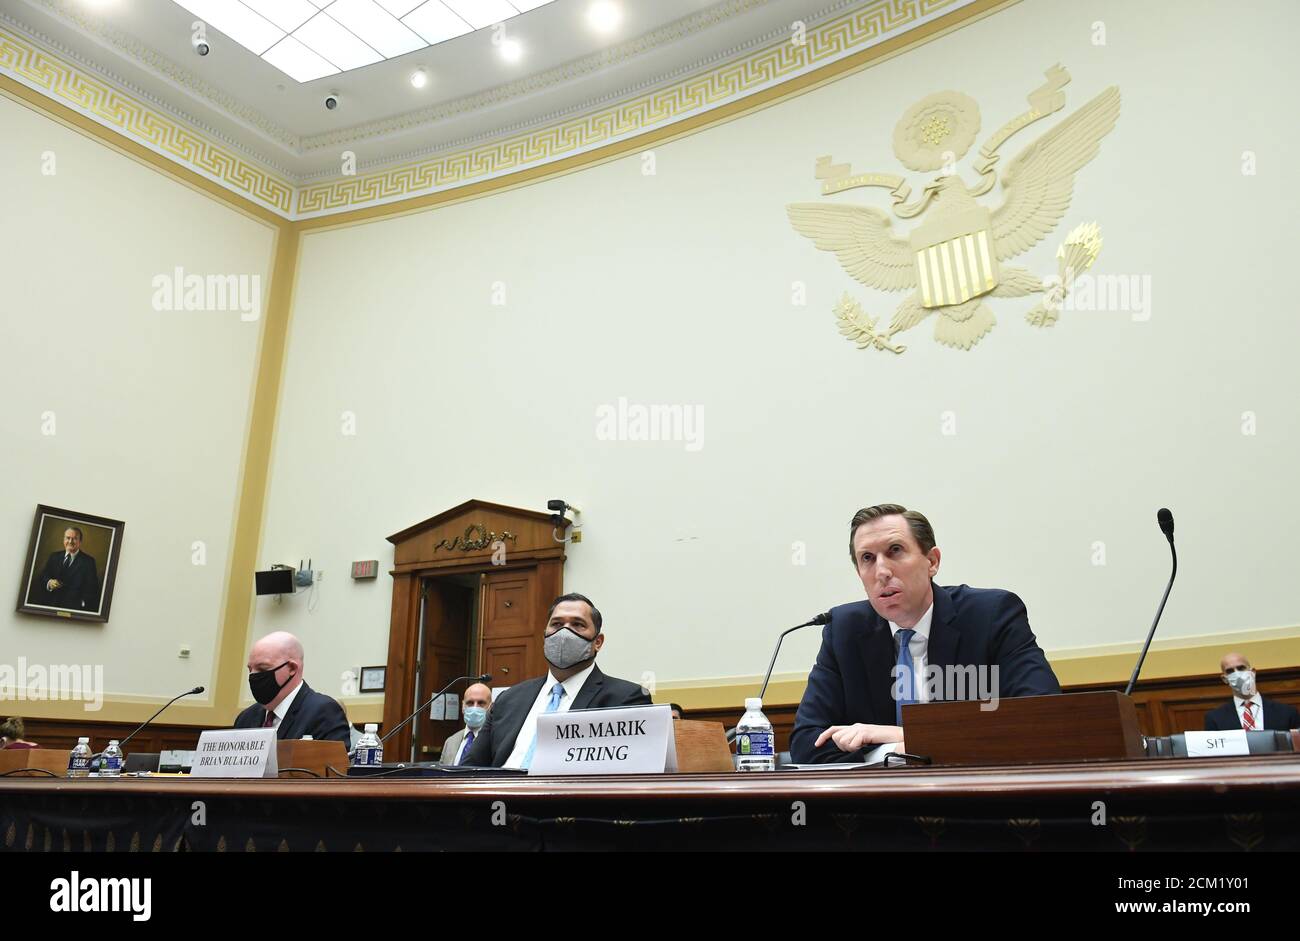 Marik String (R), Acting Legal Adviser for the State Department, testifies with R. Clarke Cooper (L), Assistant Secretary of State for Political-Military Affairs, and Brian Bulatao, Under Secretary of State for Management, during a House Committee on Foreign Affairs hearing looking into the firing of State Department Inspector General Steven Linick, on Capitol Hill in Washington, D.C. on Wednesday, September 16, 2020.   Credit: Kevin Dietsch / Pool via CNP /MediaPunch Stock Photo